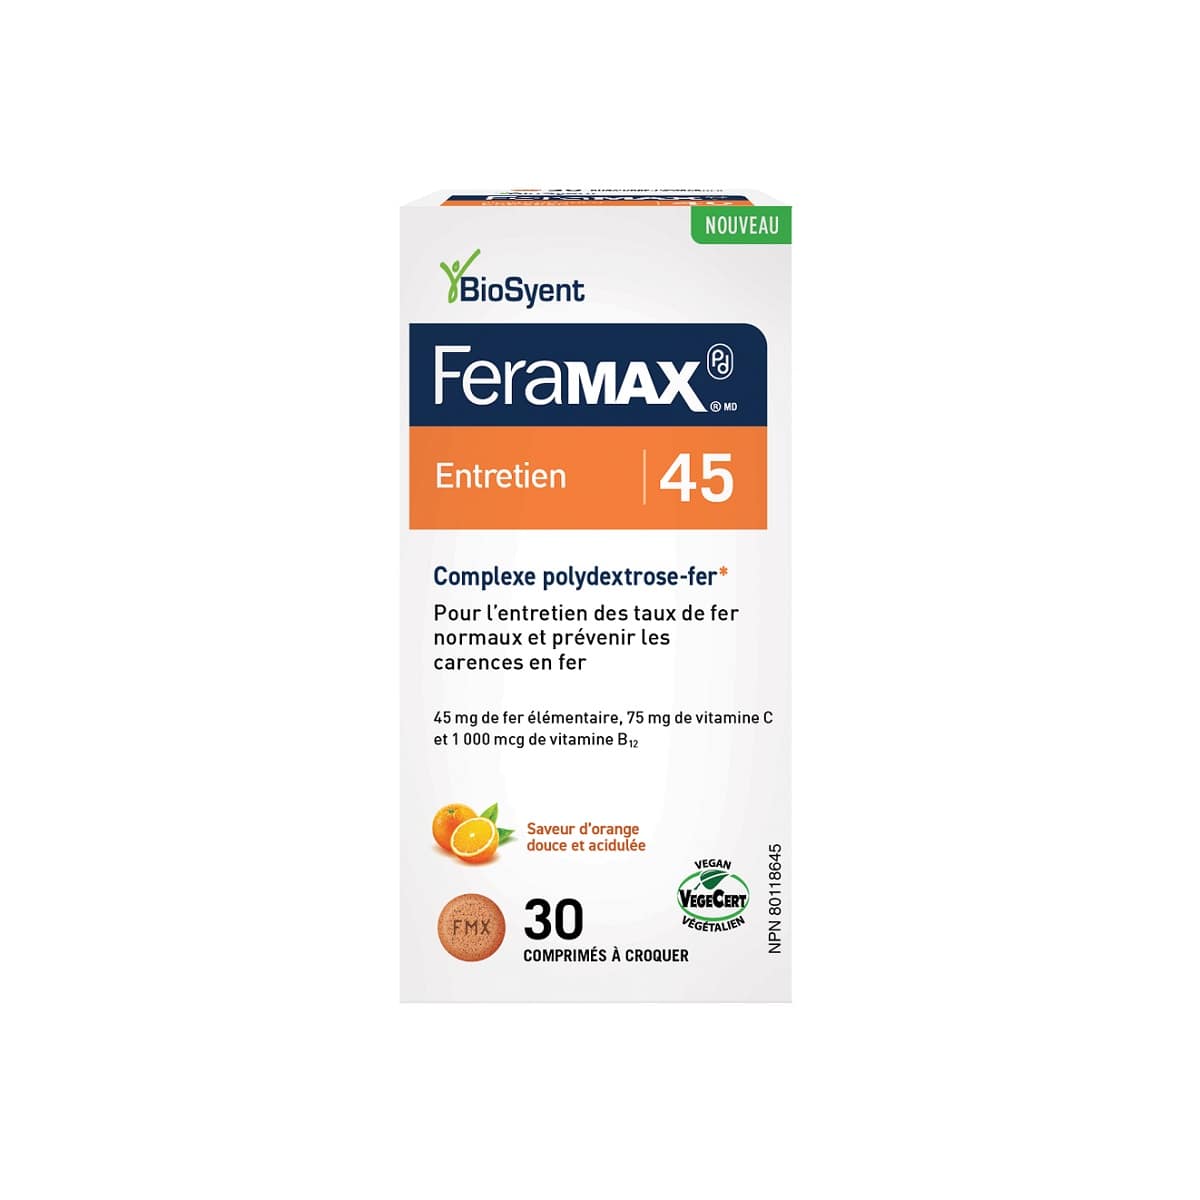 Product label for FeraMAX PD Chewables Tablets 45 mg (30 tablets) in French